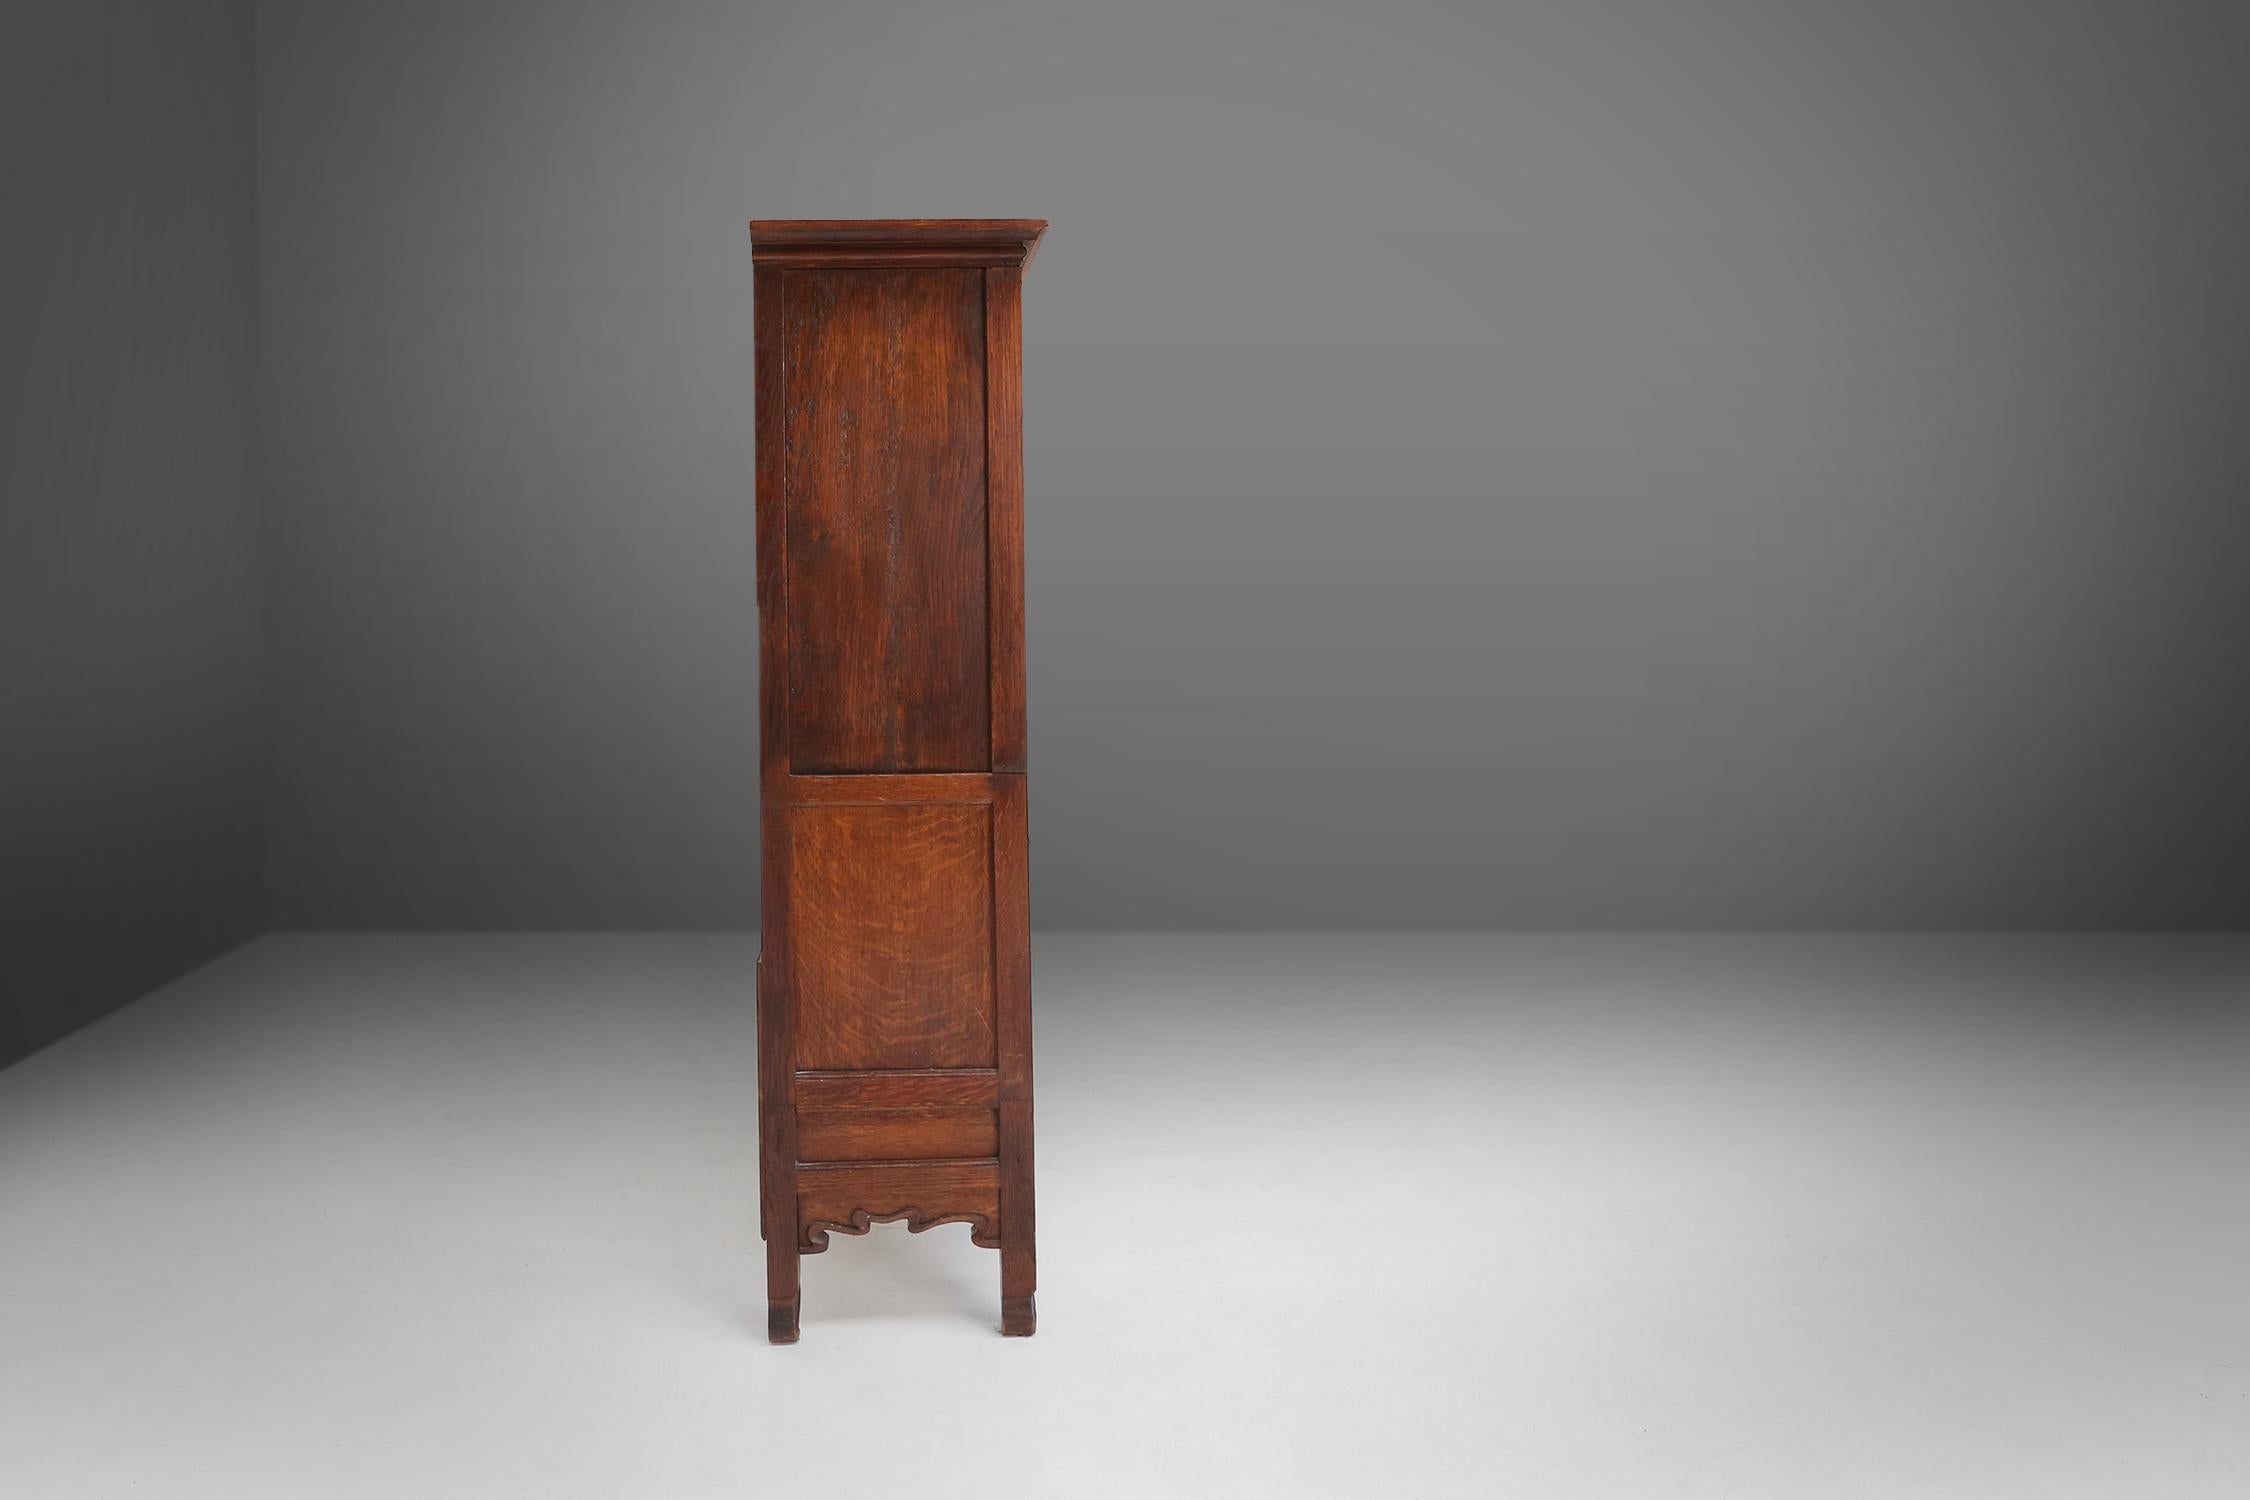 Remarkable Art Nouveau cabinet in oak with green glass door, France, 1910 For Sale 9